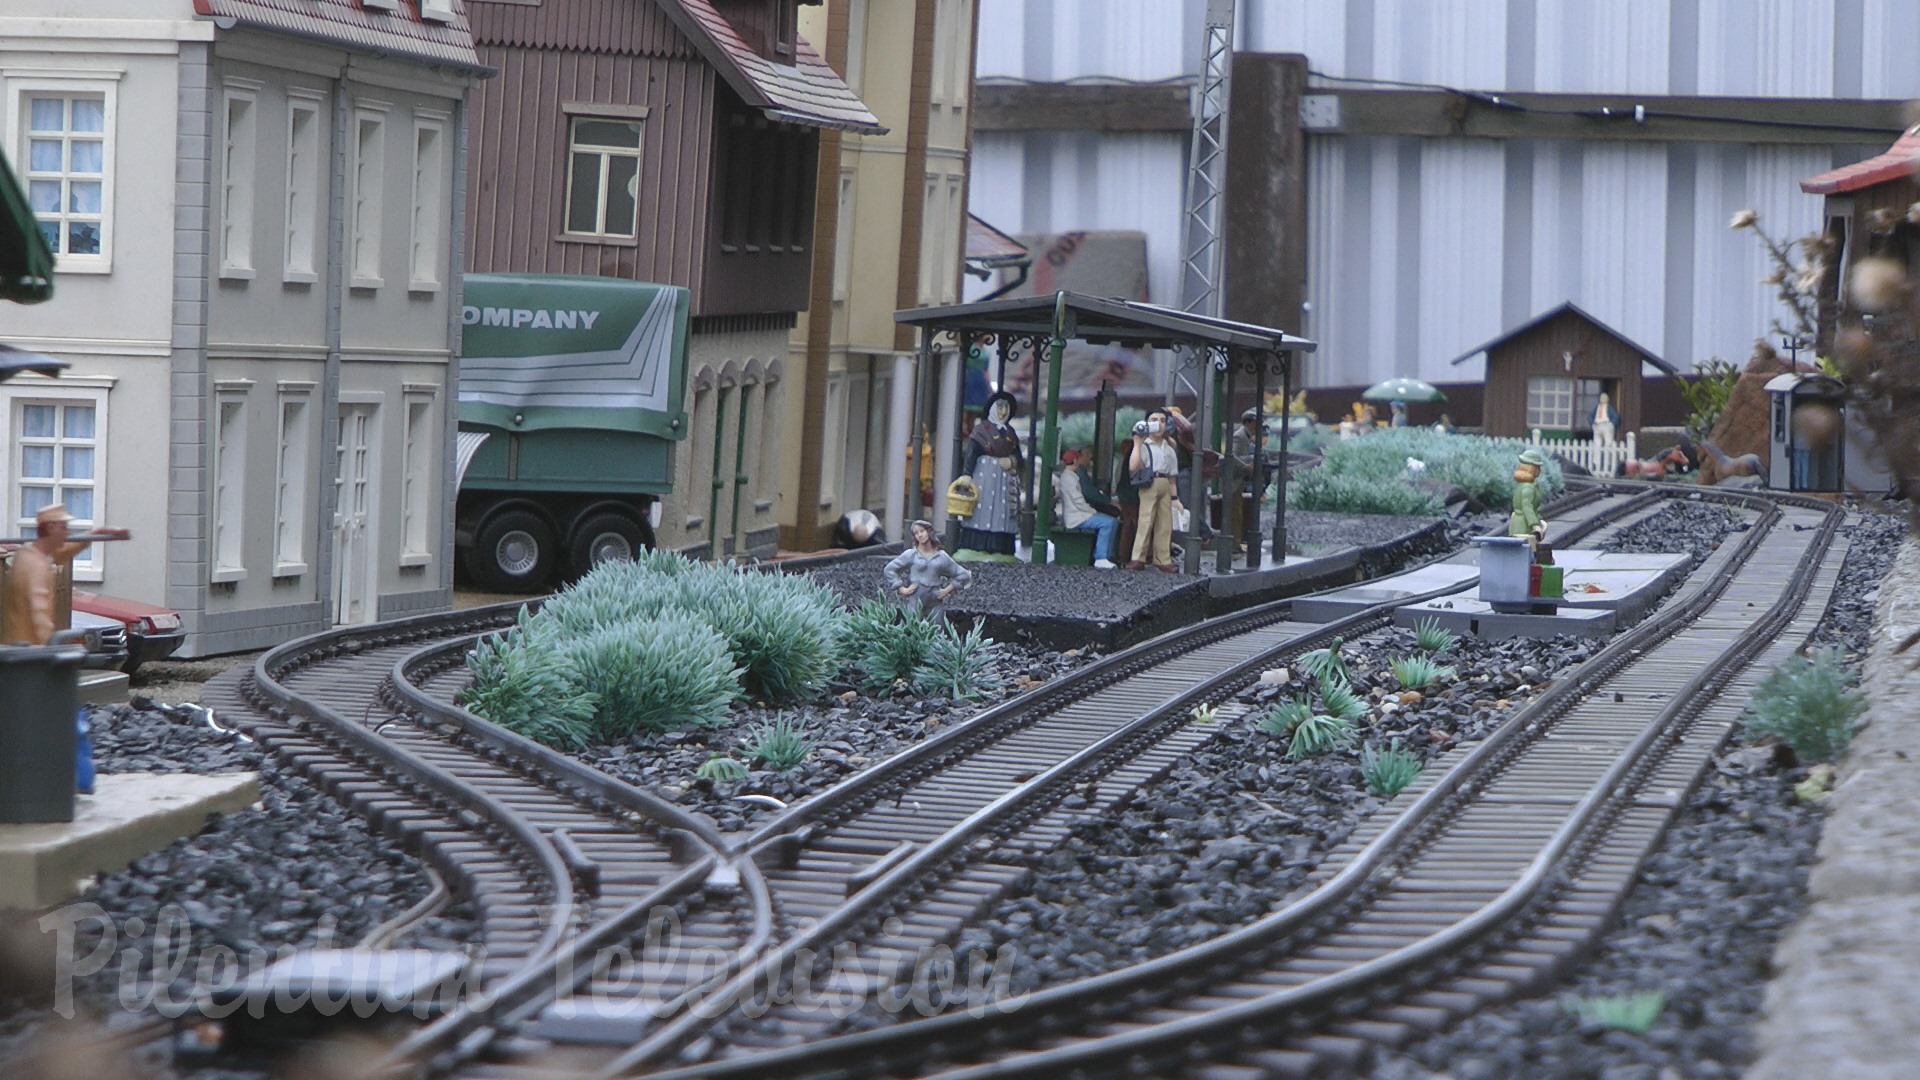 LGB Model Trains - Outdoor Model Railroad Layout in G Scale